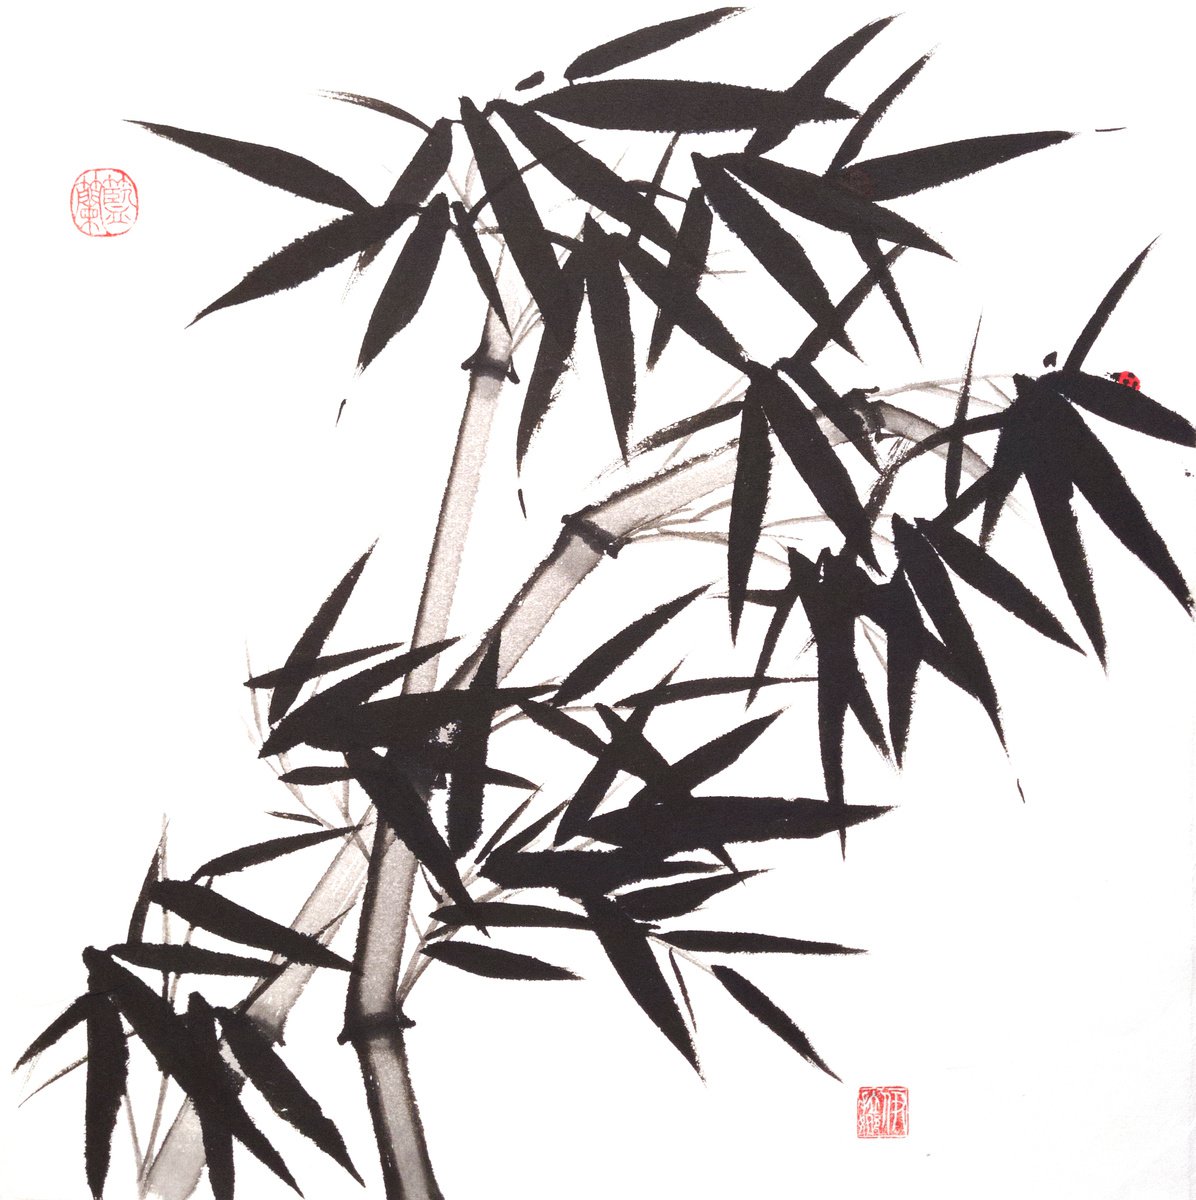 Two bamboos with a red ladybug - Bamboo series No. 2106 - Oriental Chinese Ink Painting by Ilana Shechter